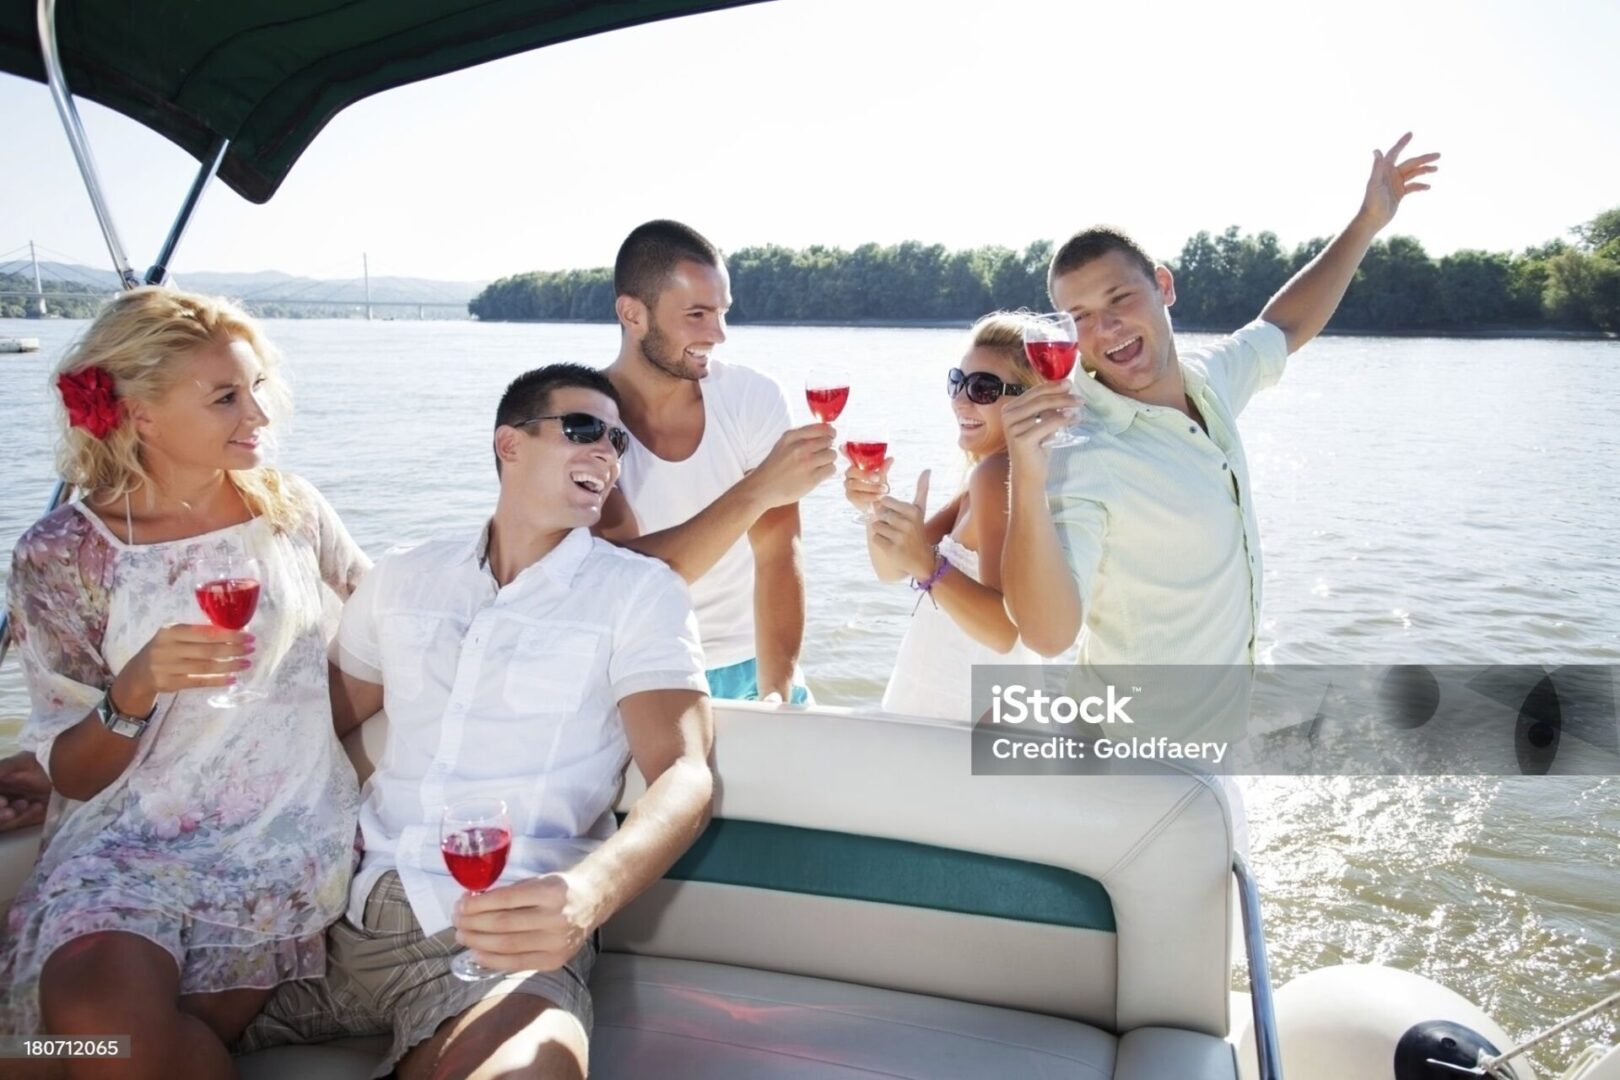 "Group of friends having fun on a yacht, drinking wine and laughing."